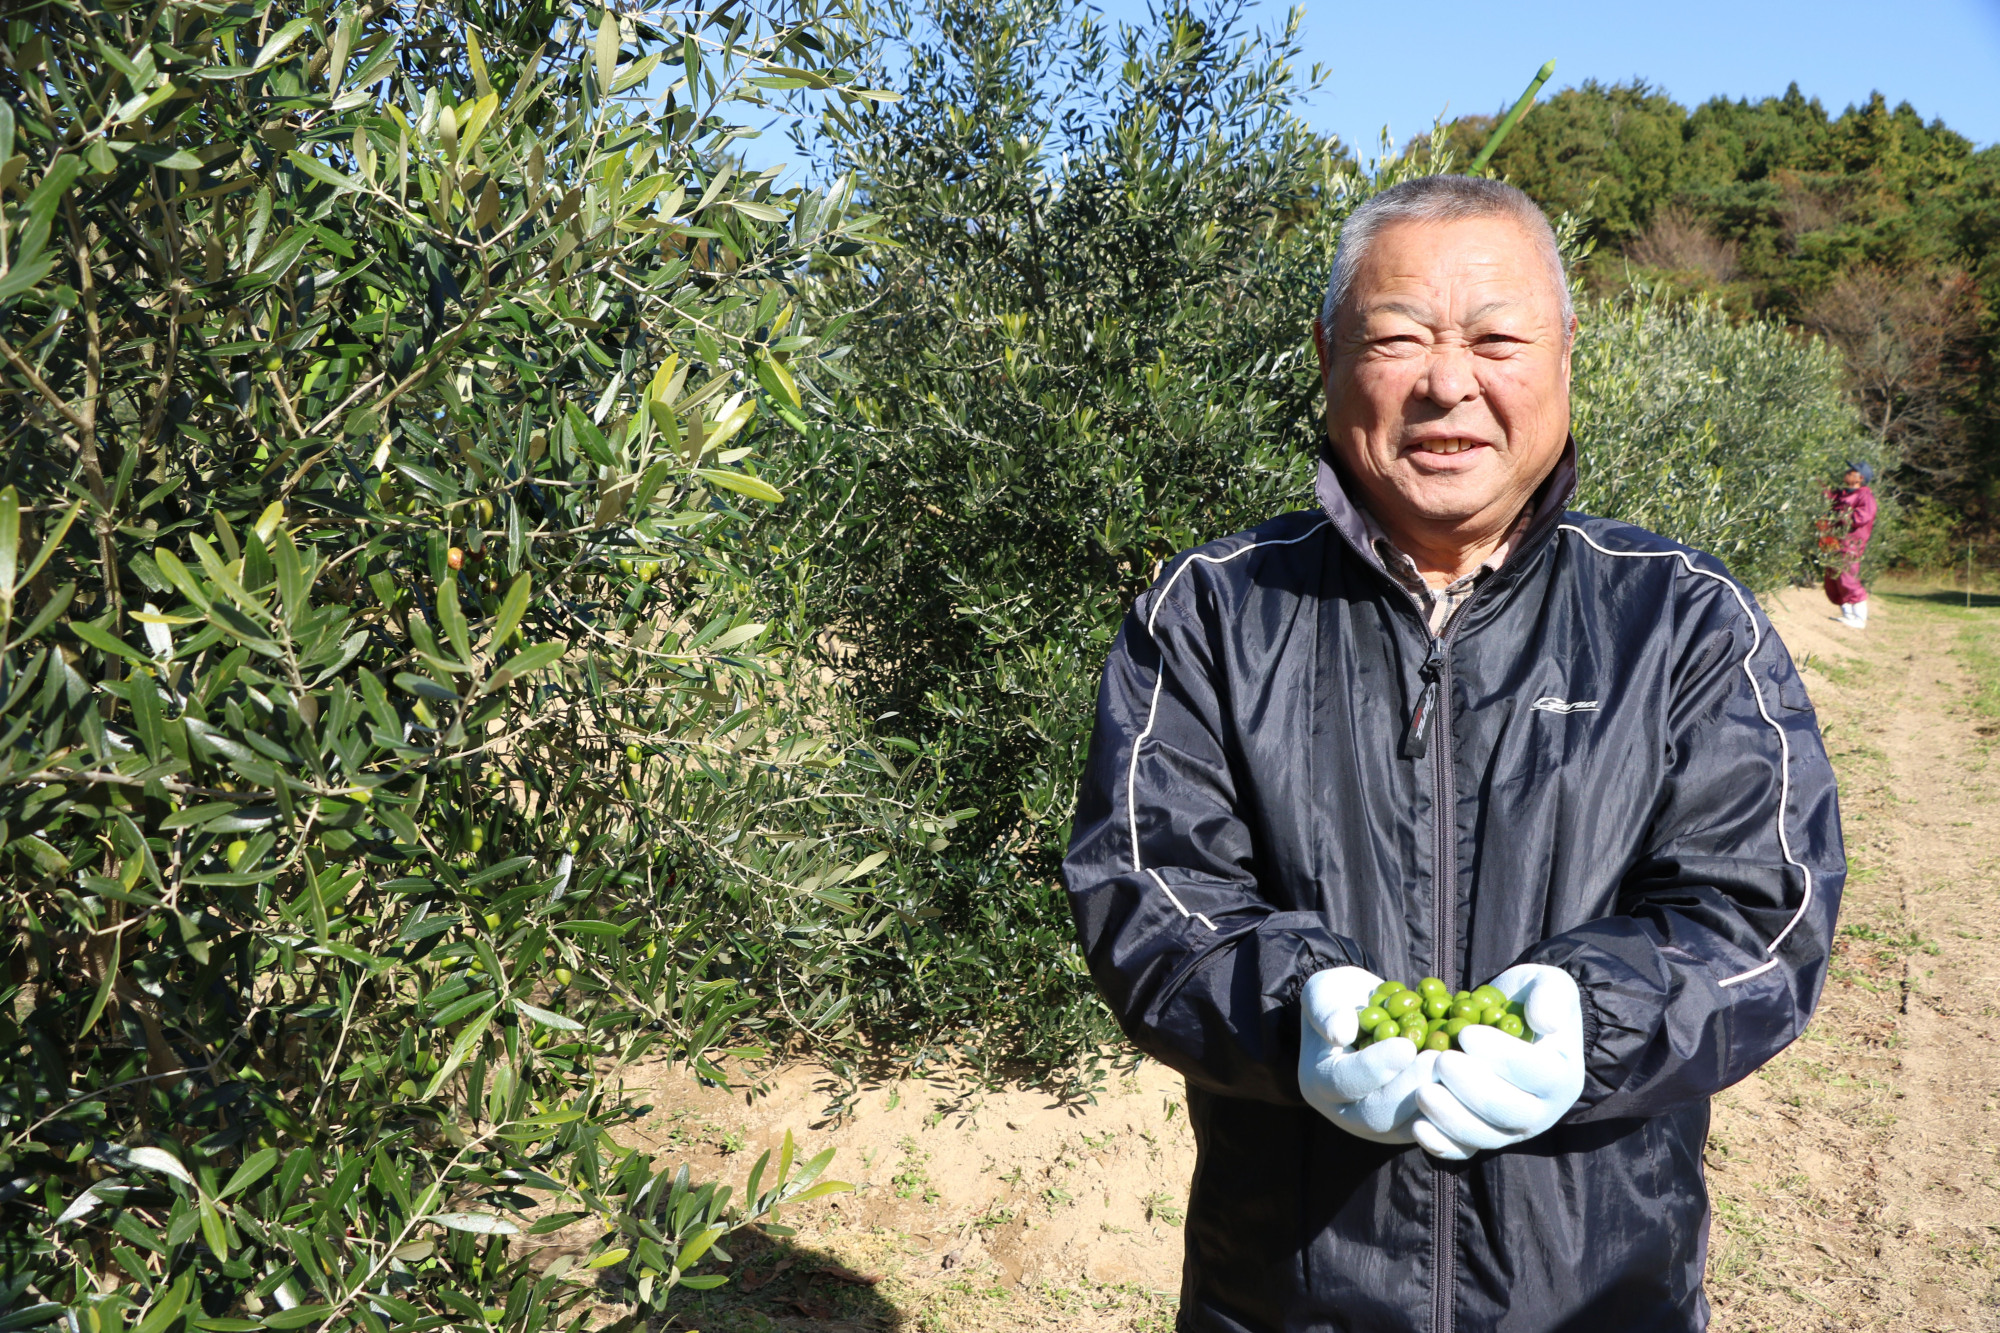 Shoetsu Chiba, representative director of the agricultural production corporation Minori in Ishinomaki, Miyagi Prefecture, started growing olives after his rice paddies were washed away by the 2011 tsunami. | KYODO